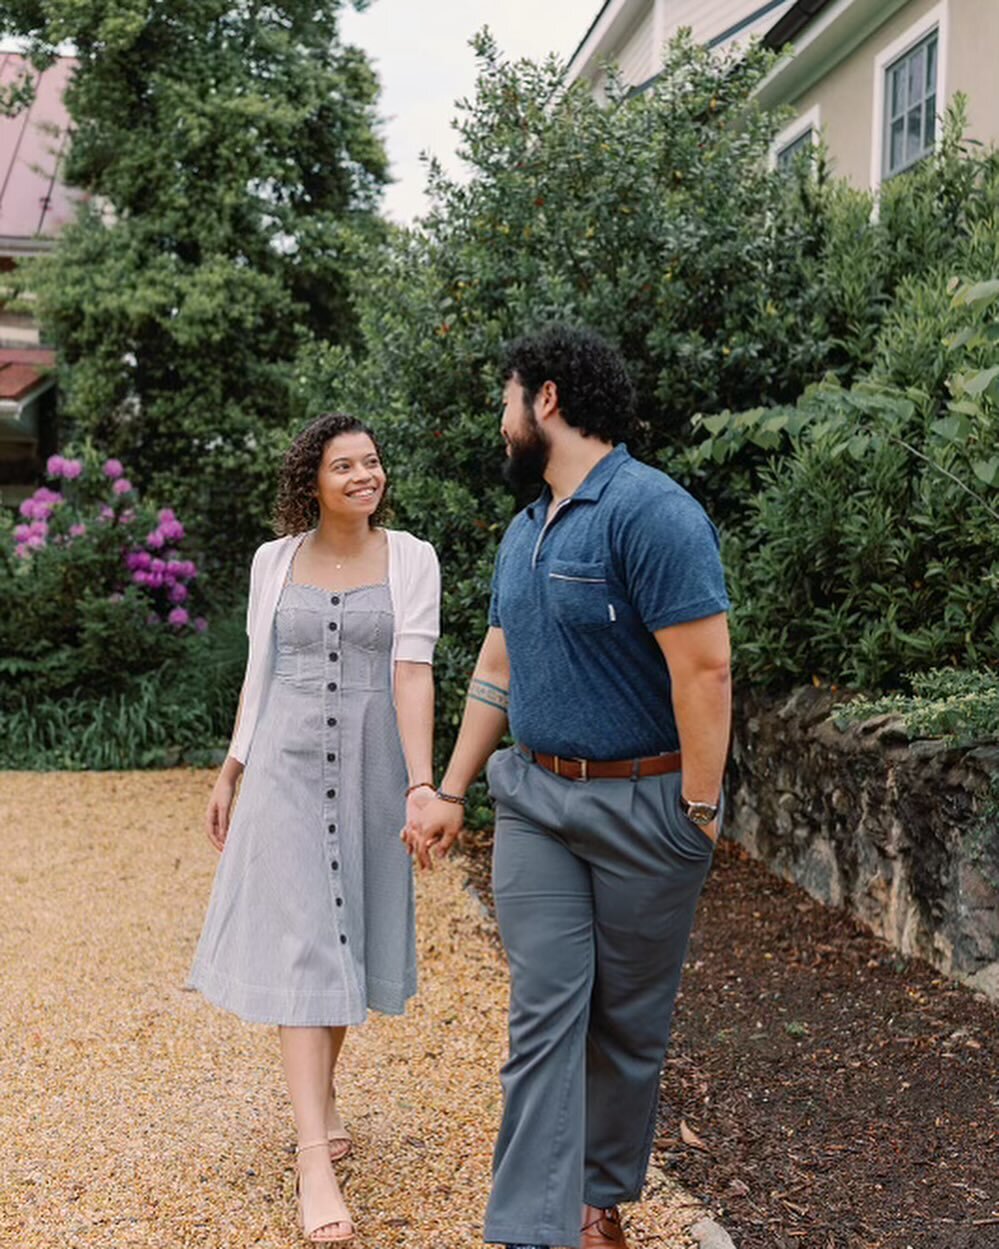 From the school bus stop to the wedding aisle!! So excited for B &amp; A to become husband and wife tomorrow!! Keep these sweethearts in your prayers, and an eye out for their colorful, citrus inspired wedding day! 💛🍊

Photos by @karaloryn